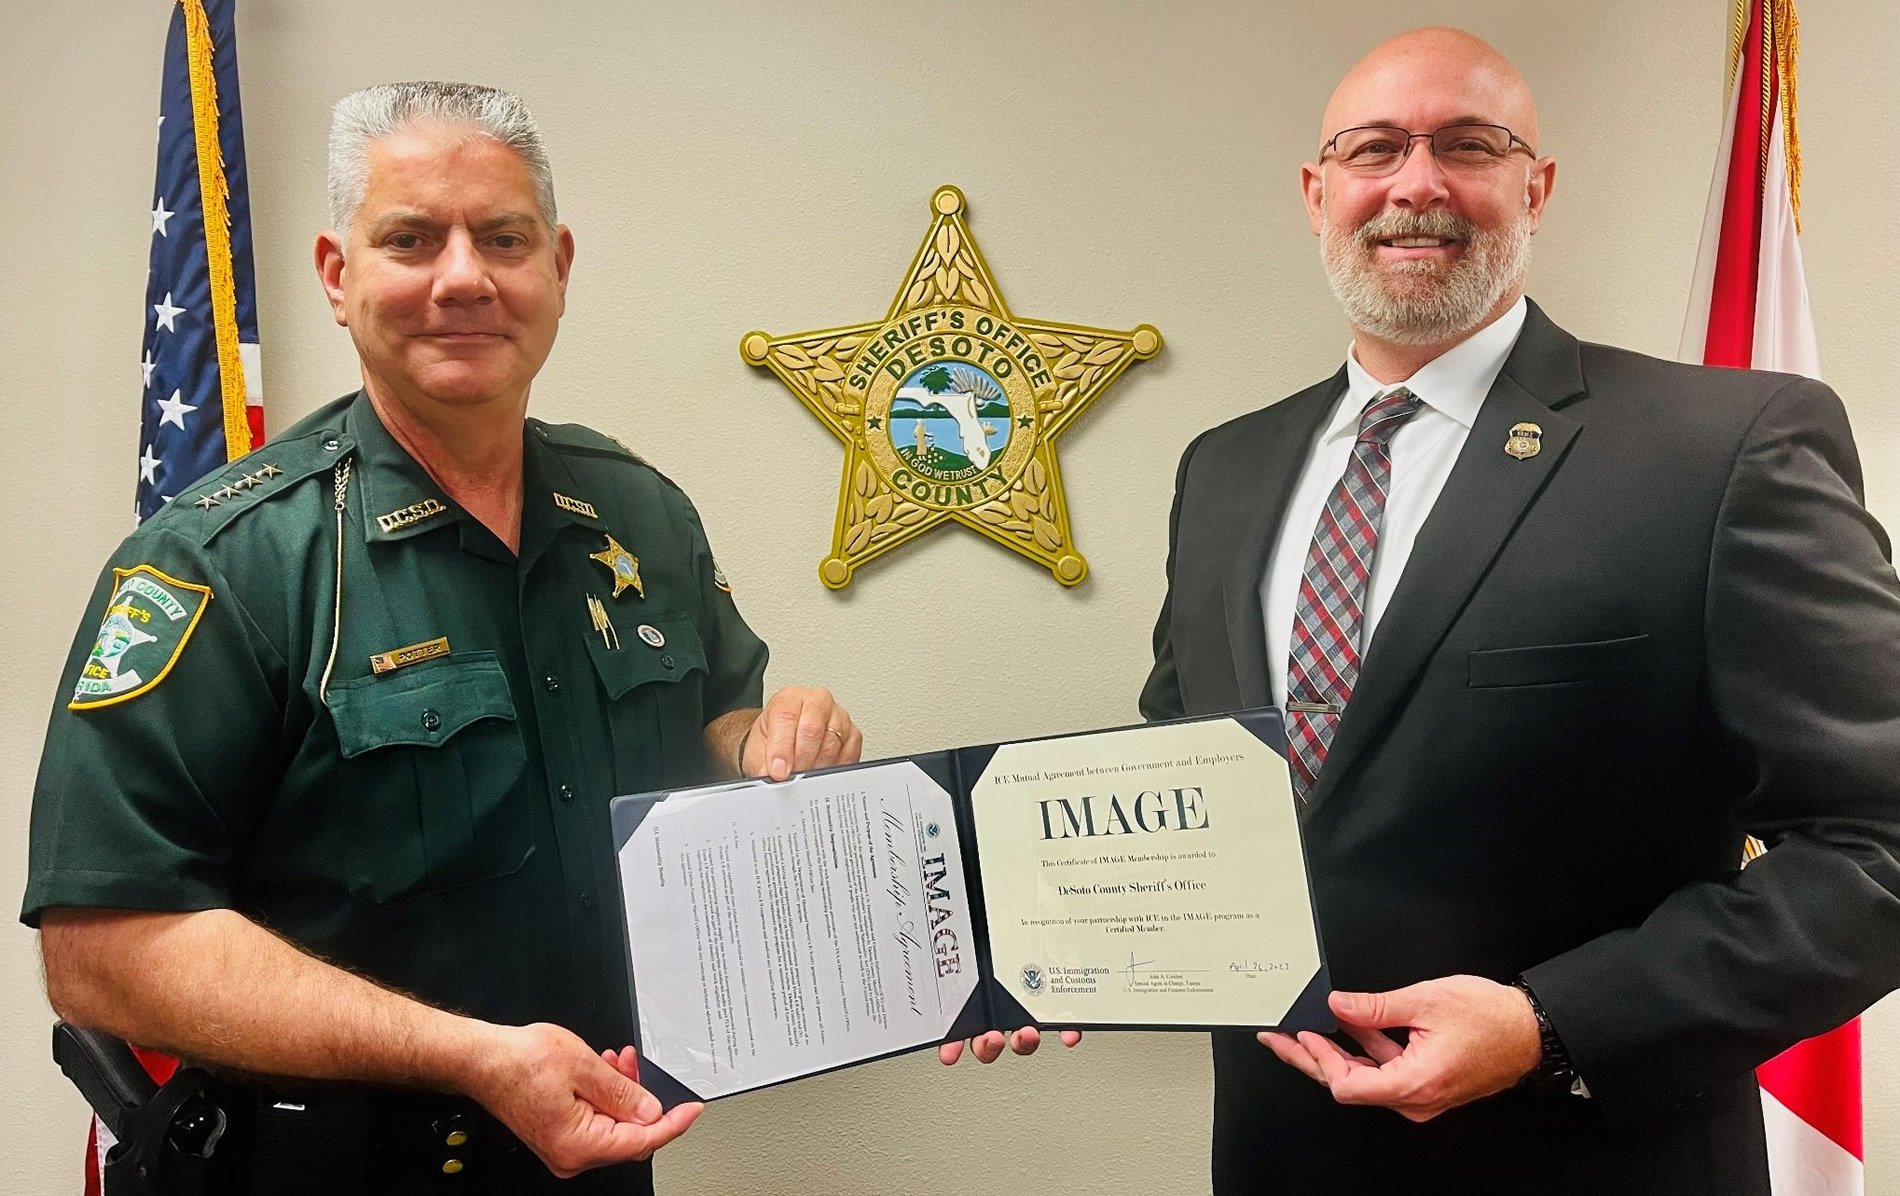 DeSoto County Sheriff James Potter poses with Special Agent Mark VanDenberghe